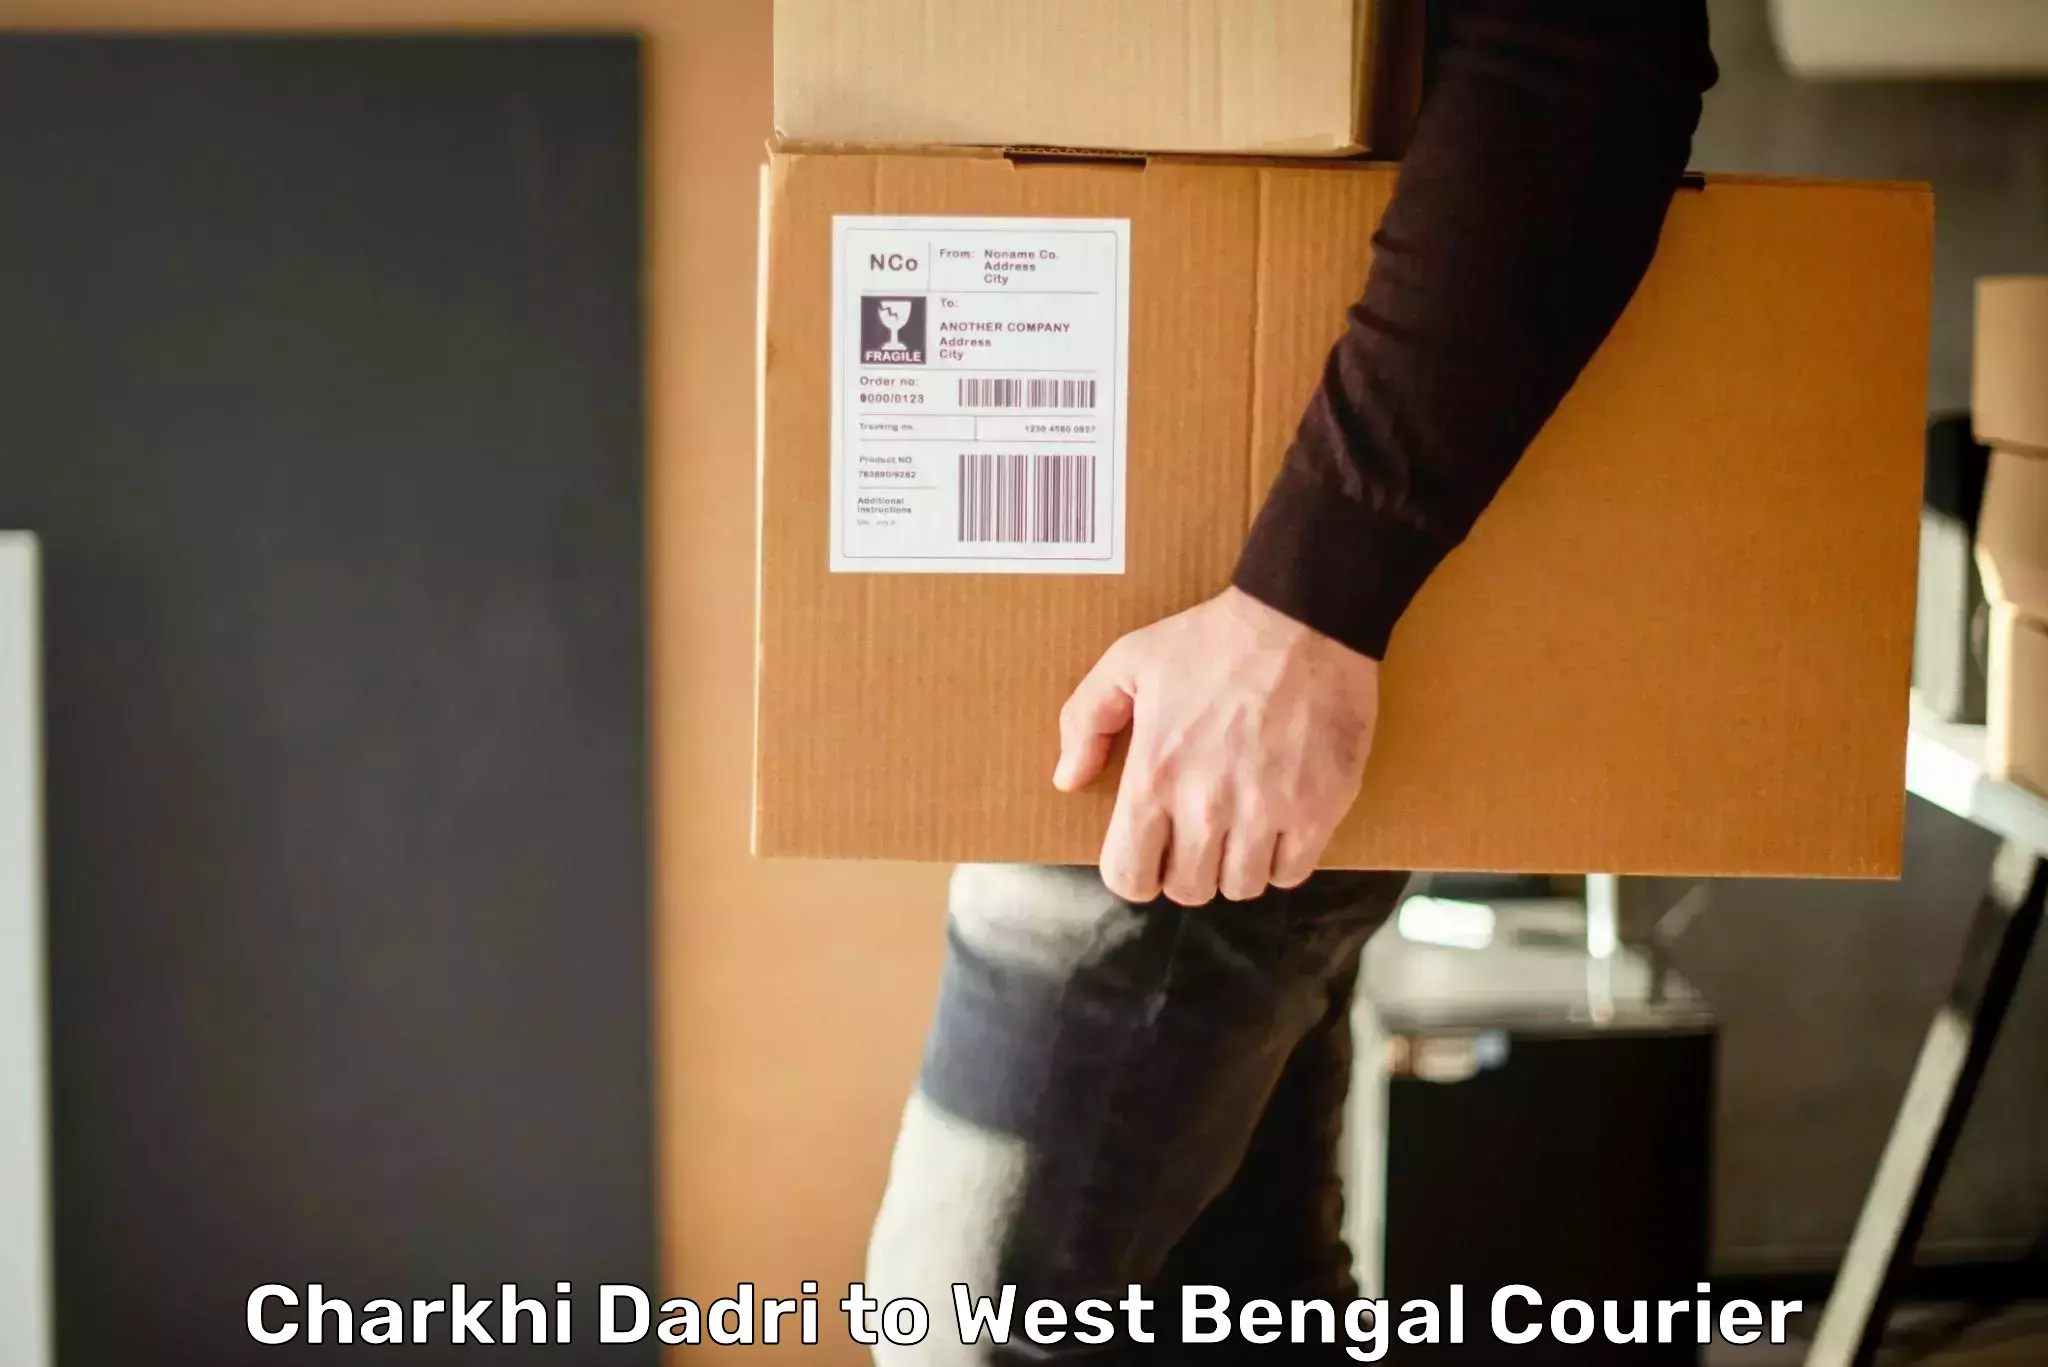 Courier service efficiency Charkhi Dadri to West Bengal